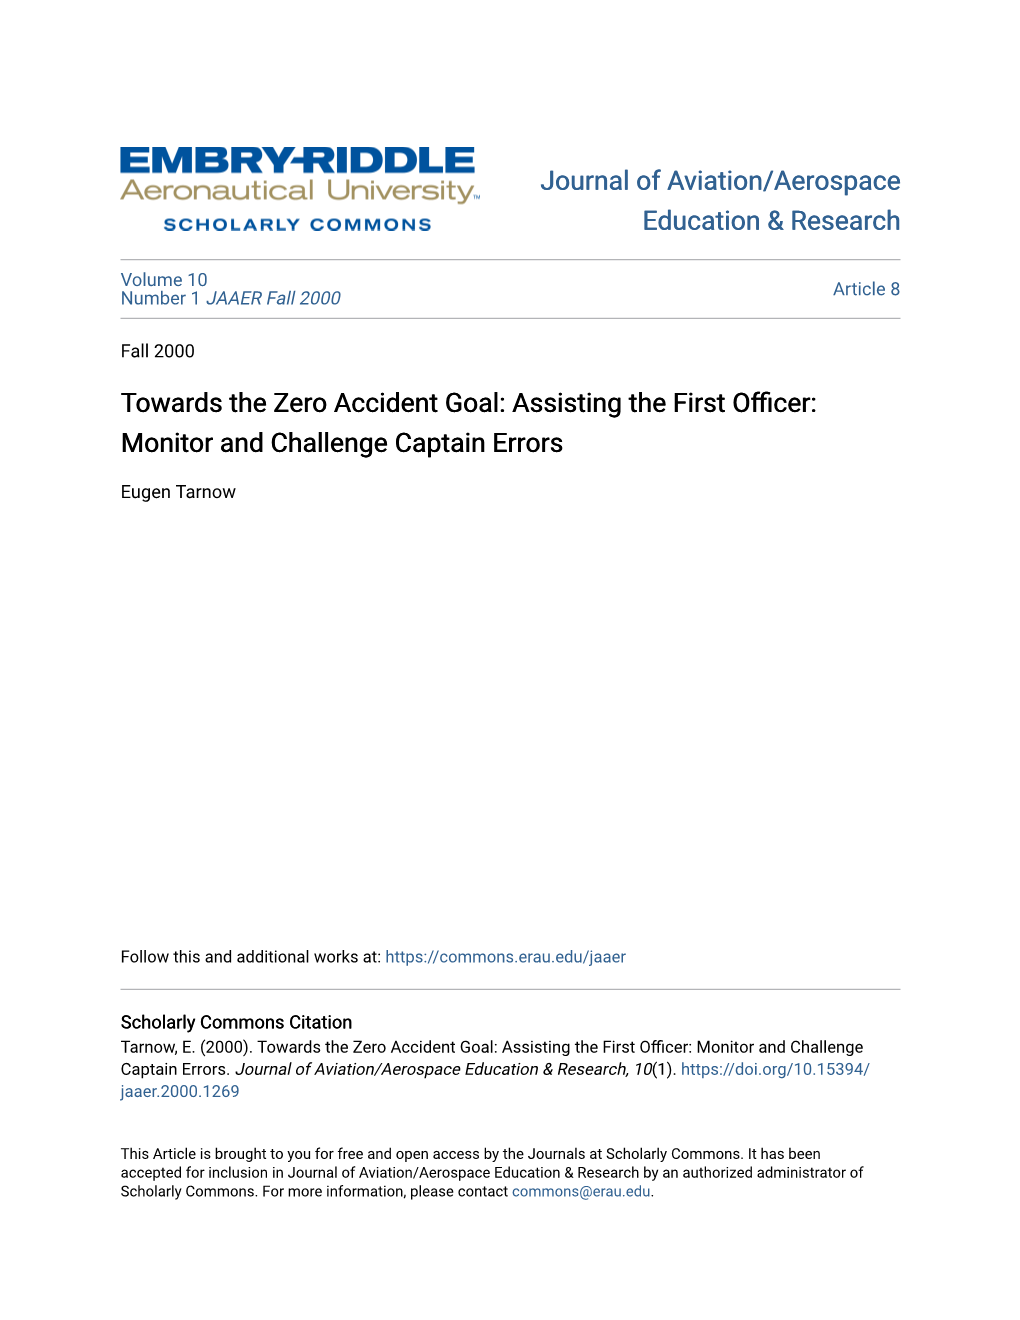 Towards the Zero Accident Goal: Assisting the First Officer: Monitor and Challenge Captain Errors